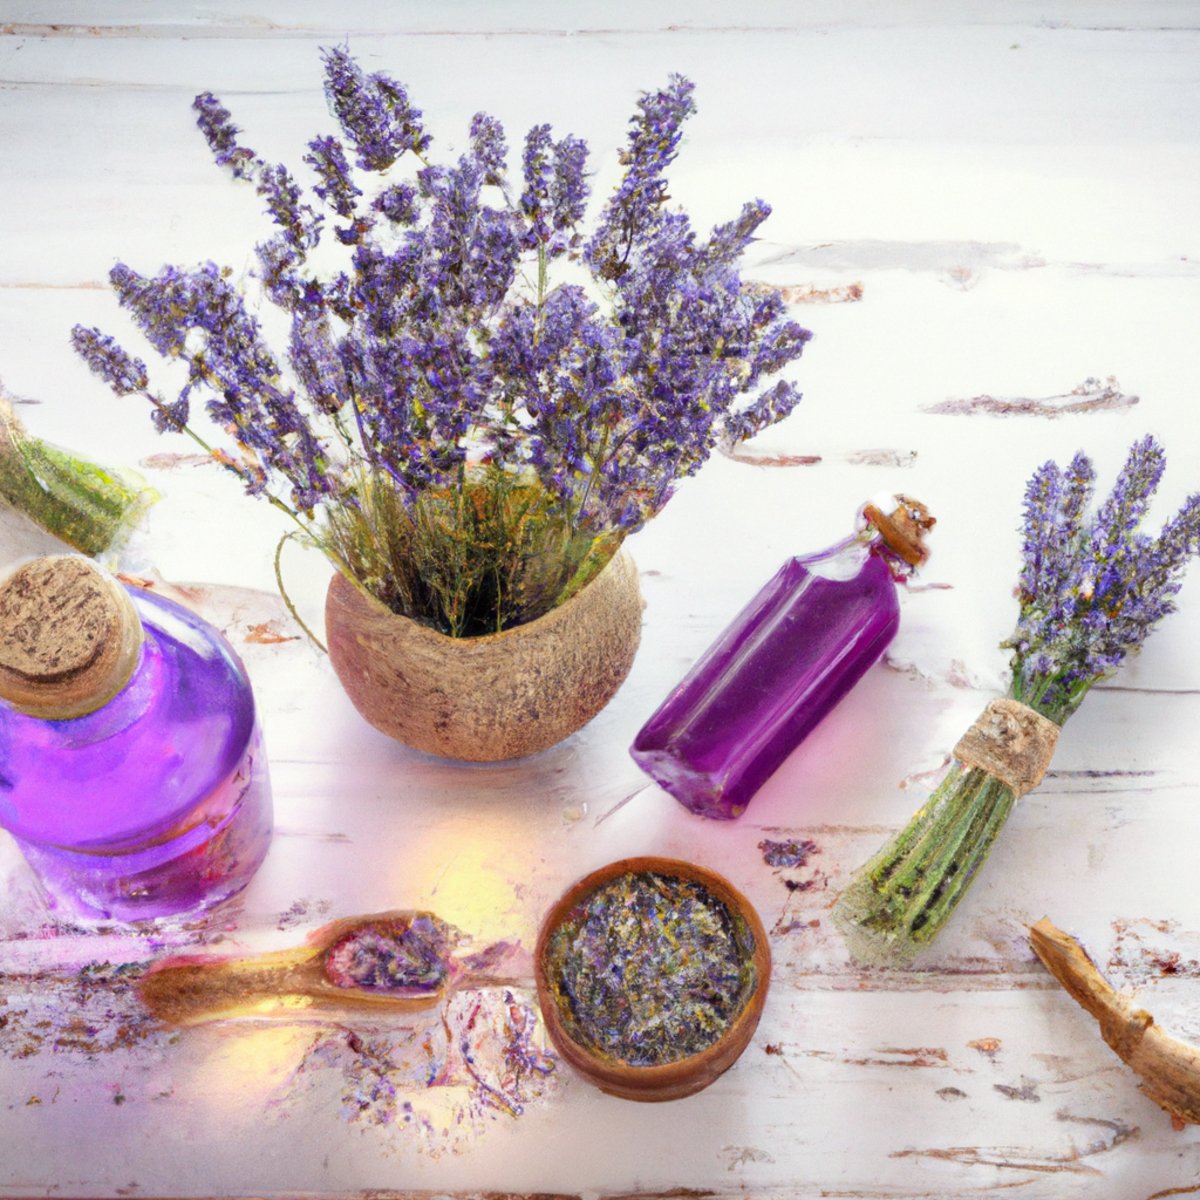 Serene scene of natural beauty remedies: lavender bouquet, essential oils, cotton towel, aromatic herbs. Relaxation and pampering.